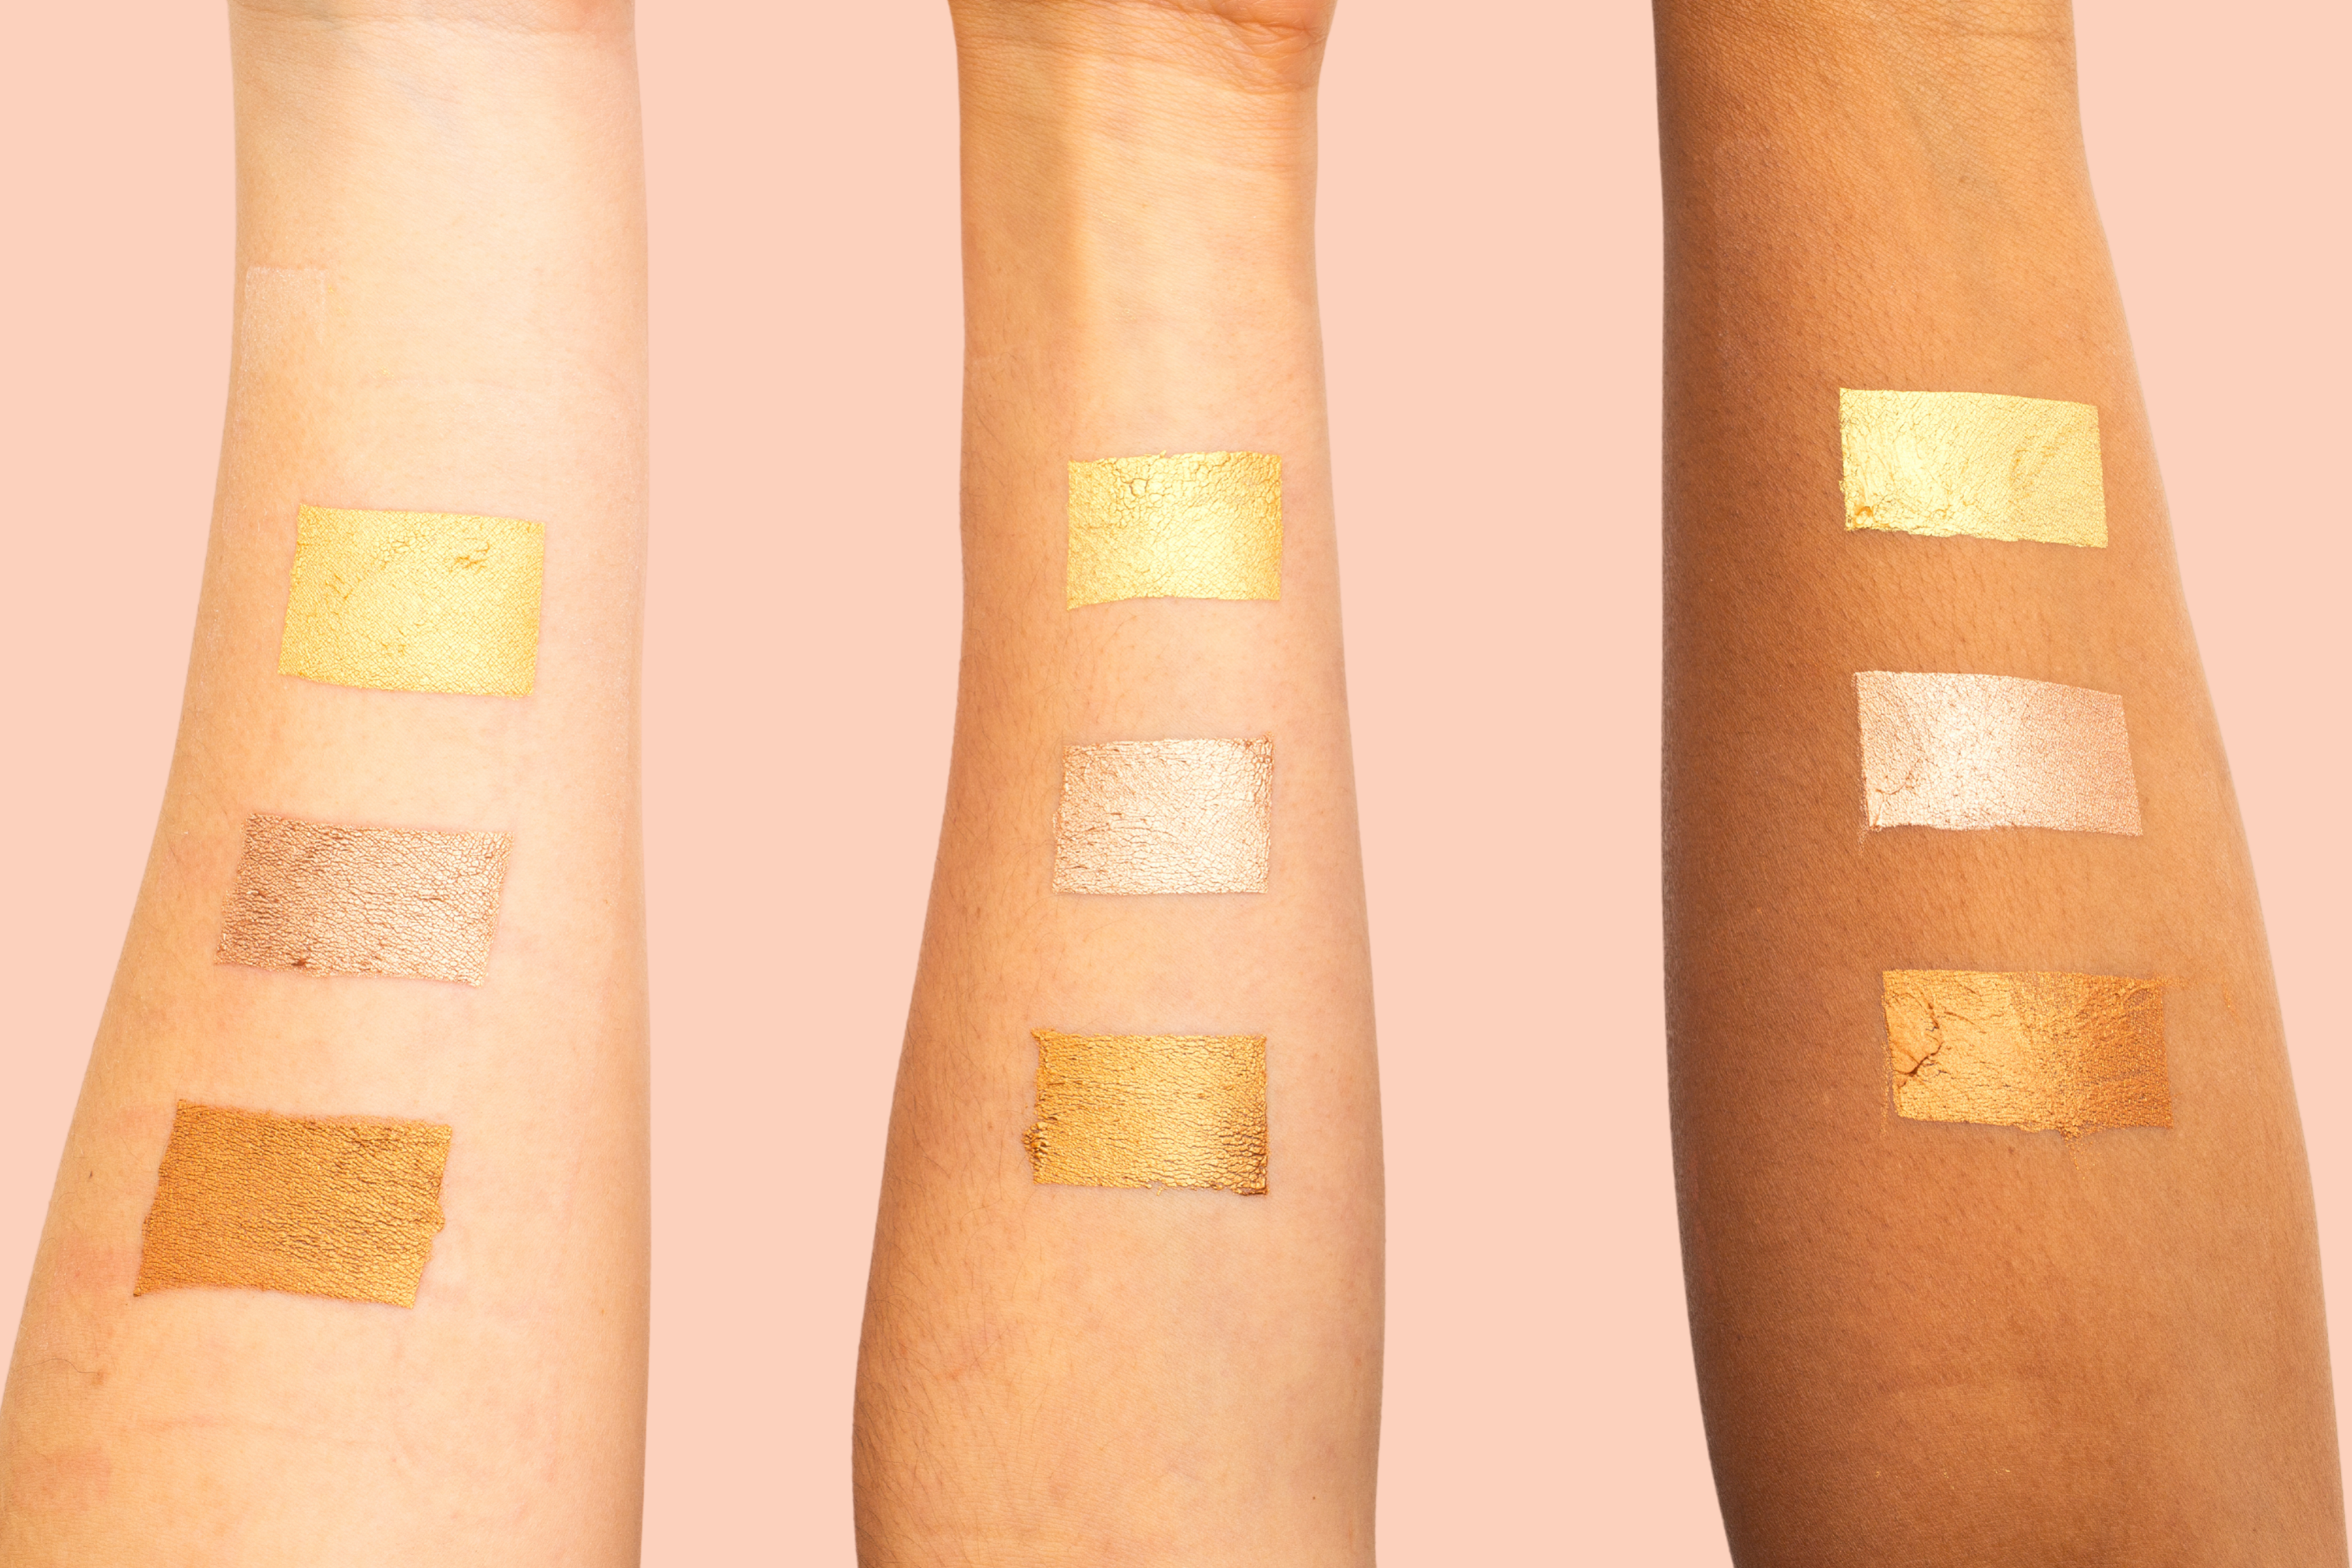 image of skin dew swatches on forearms of light, medium & deep complexions against peach background